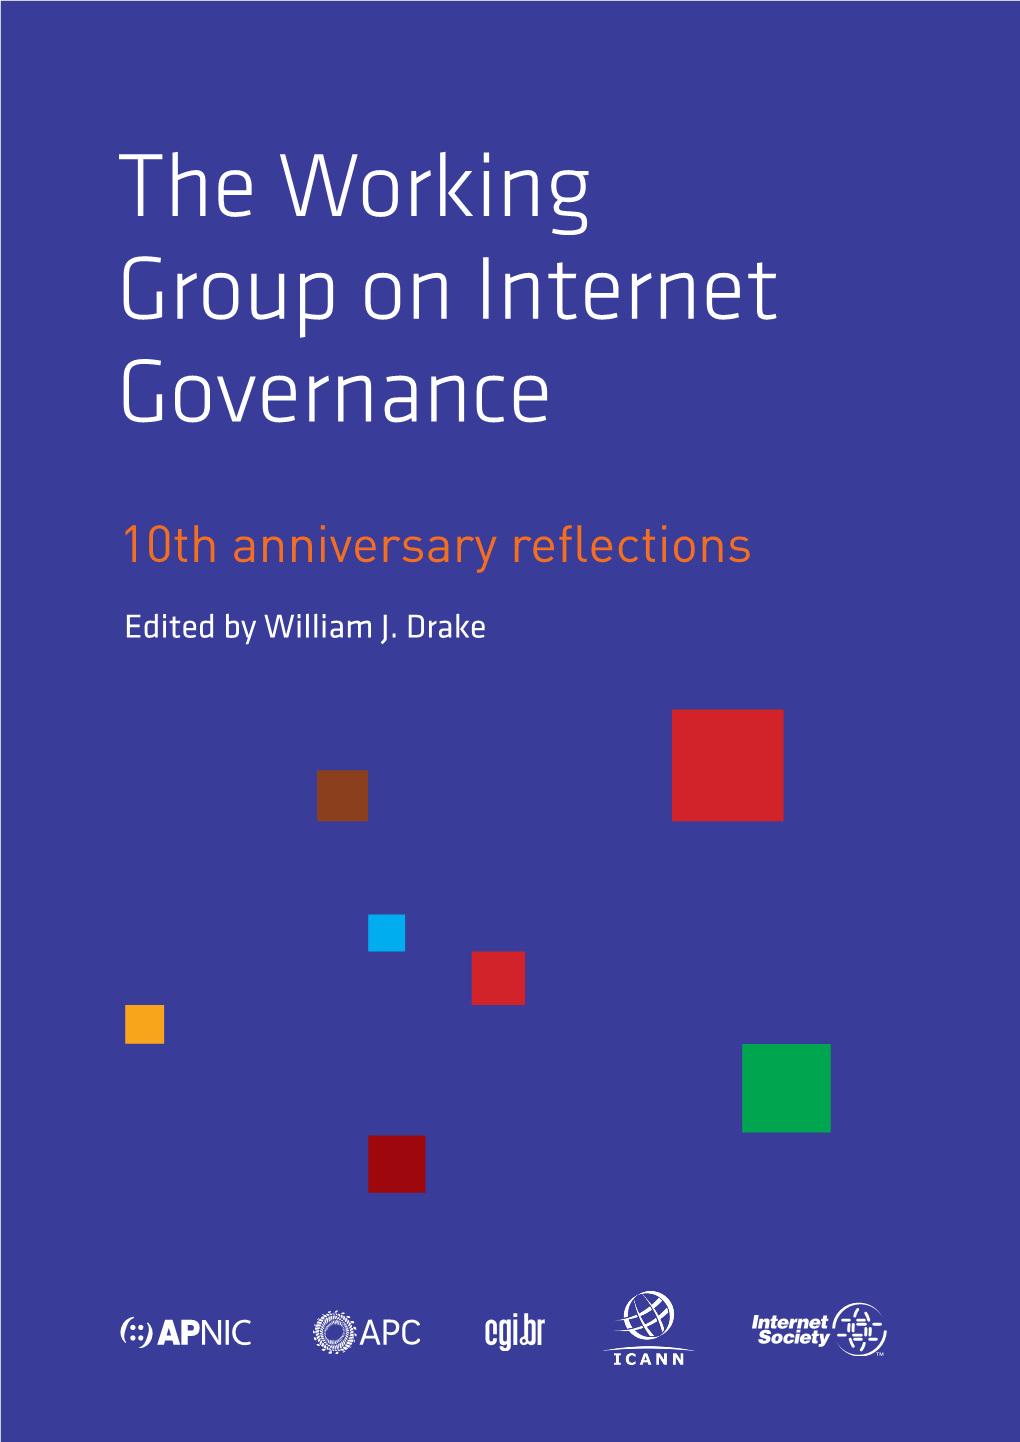 The Working Group on Internet Governance